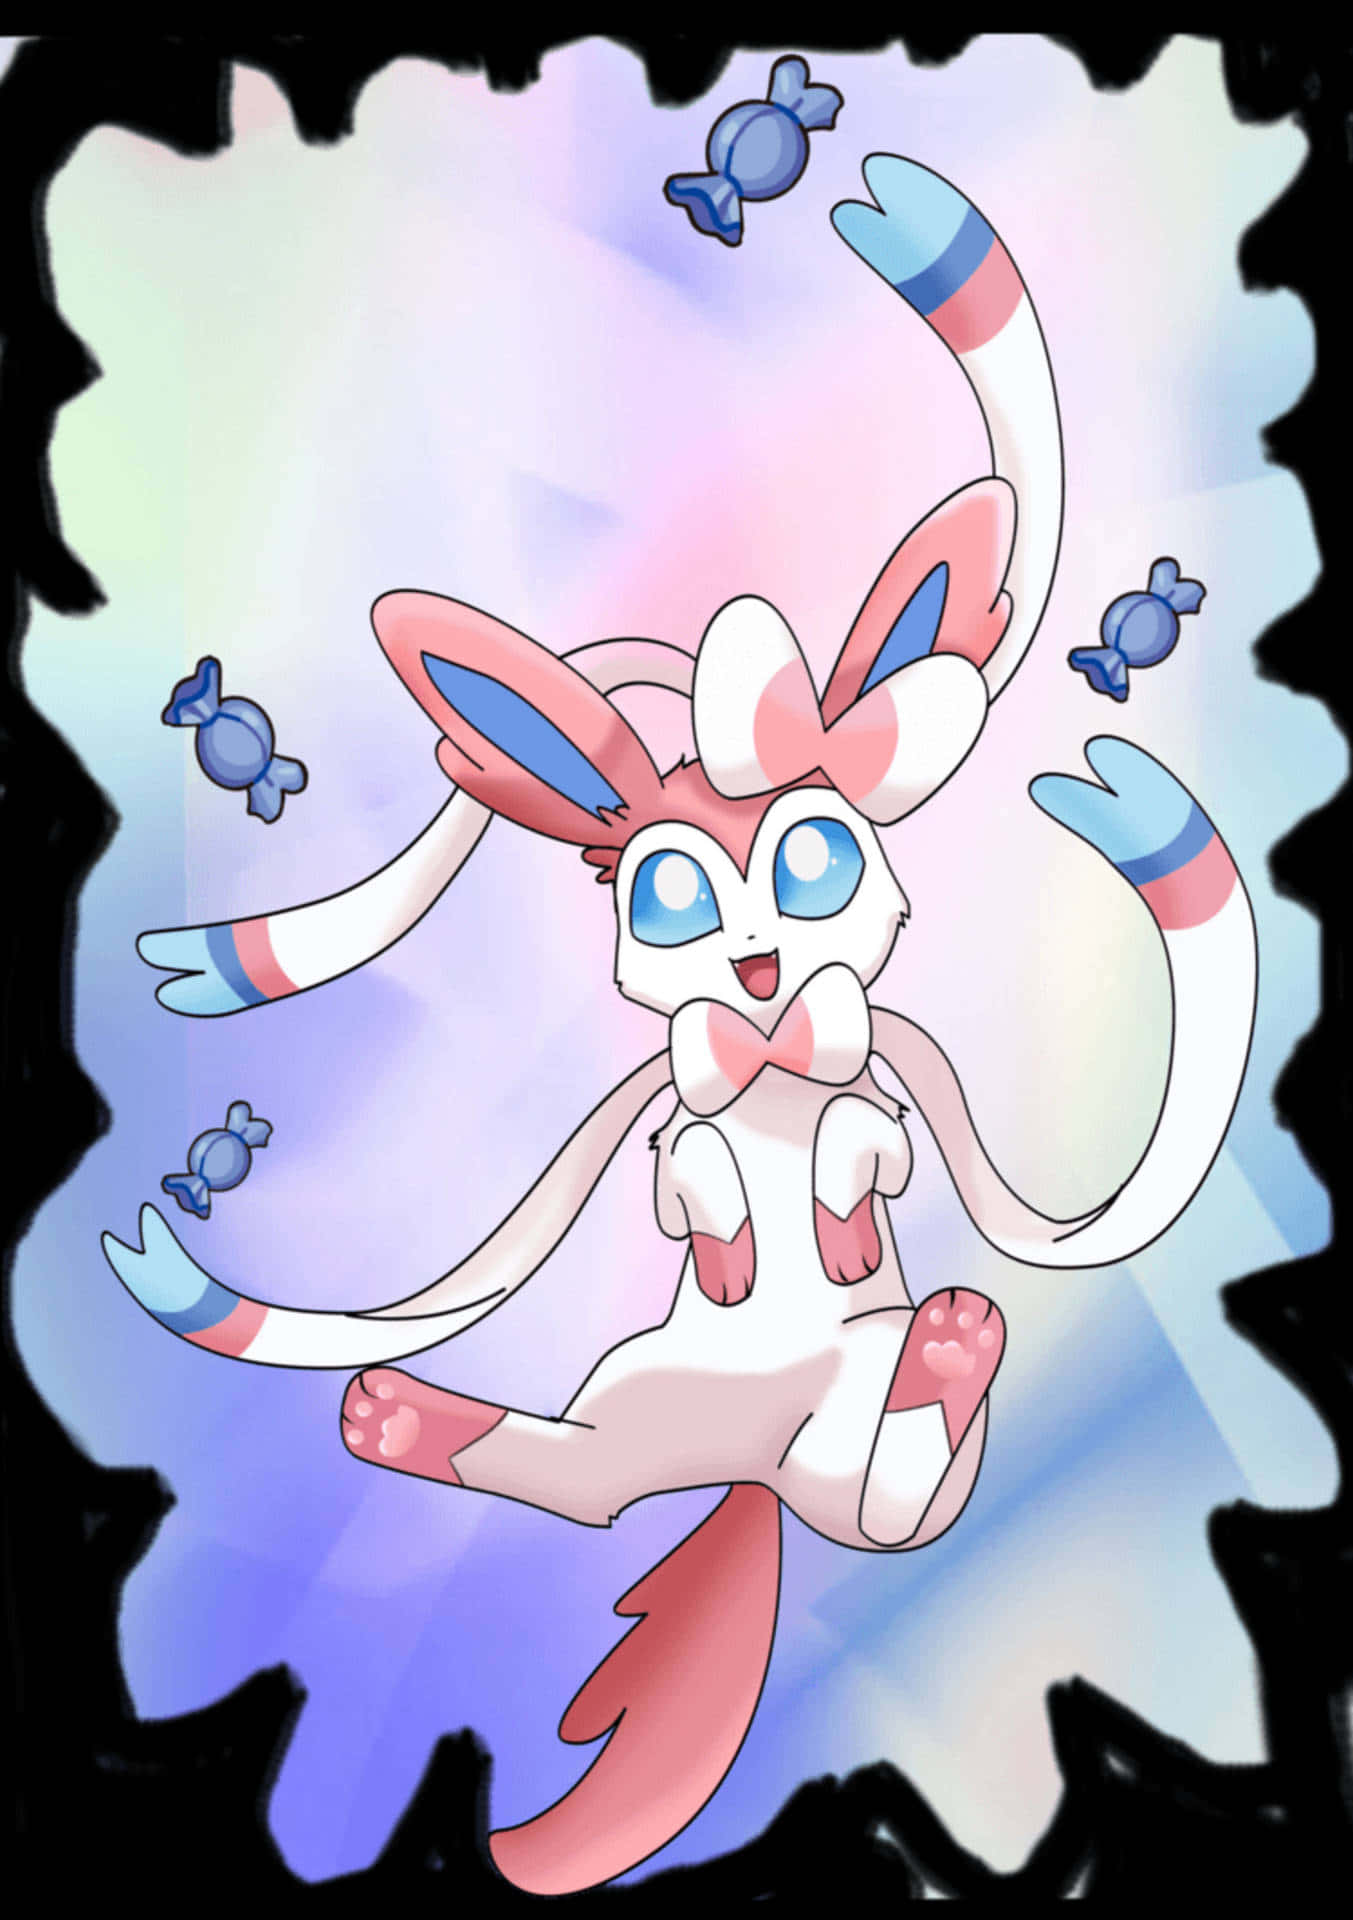 "Welcome to a world of sweetness and magic with Cute Sylveon!" Wallpaper